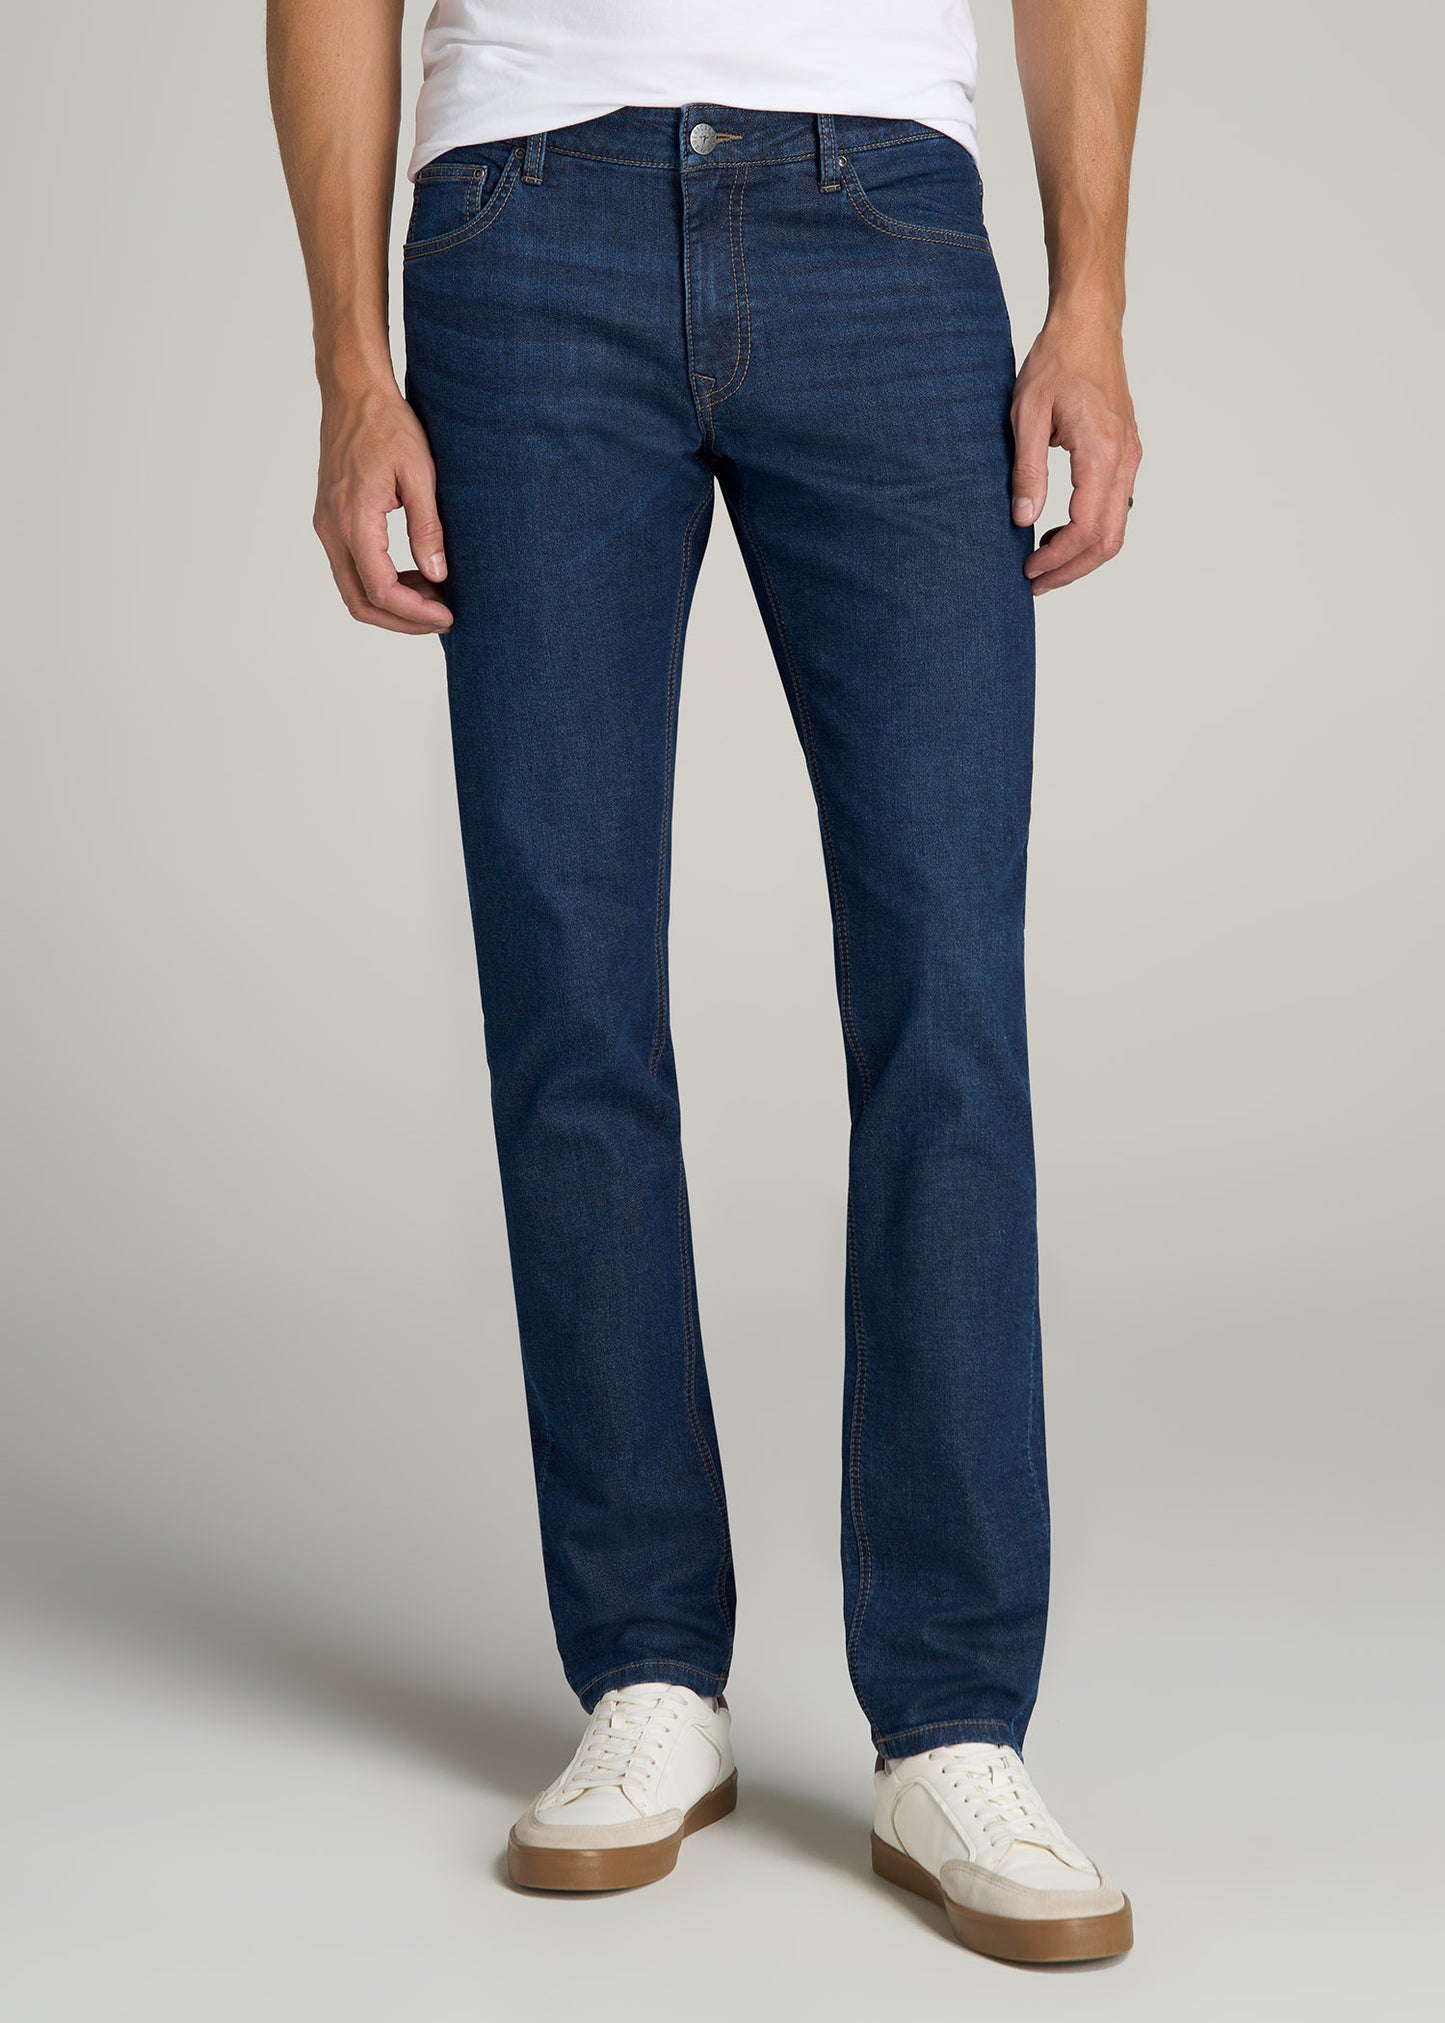 Carman TAPERED Fleeced Jeans for Tall Men in Colorado Blue Wash